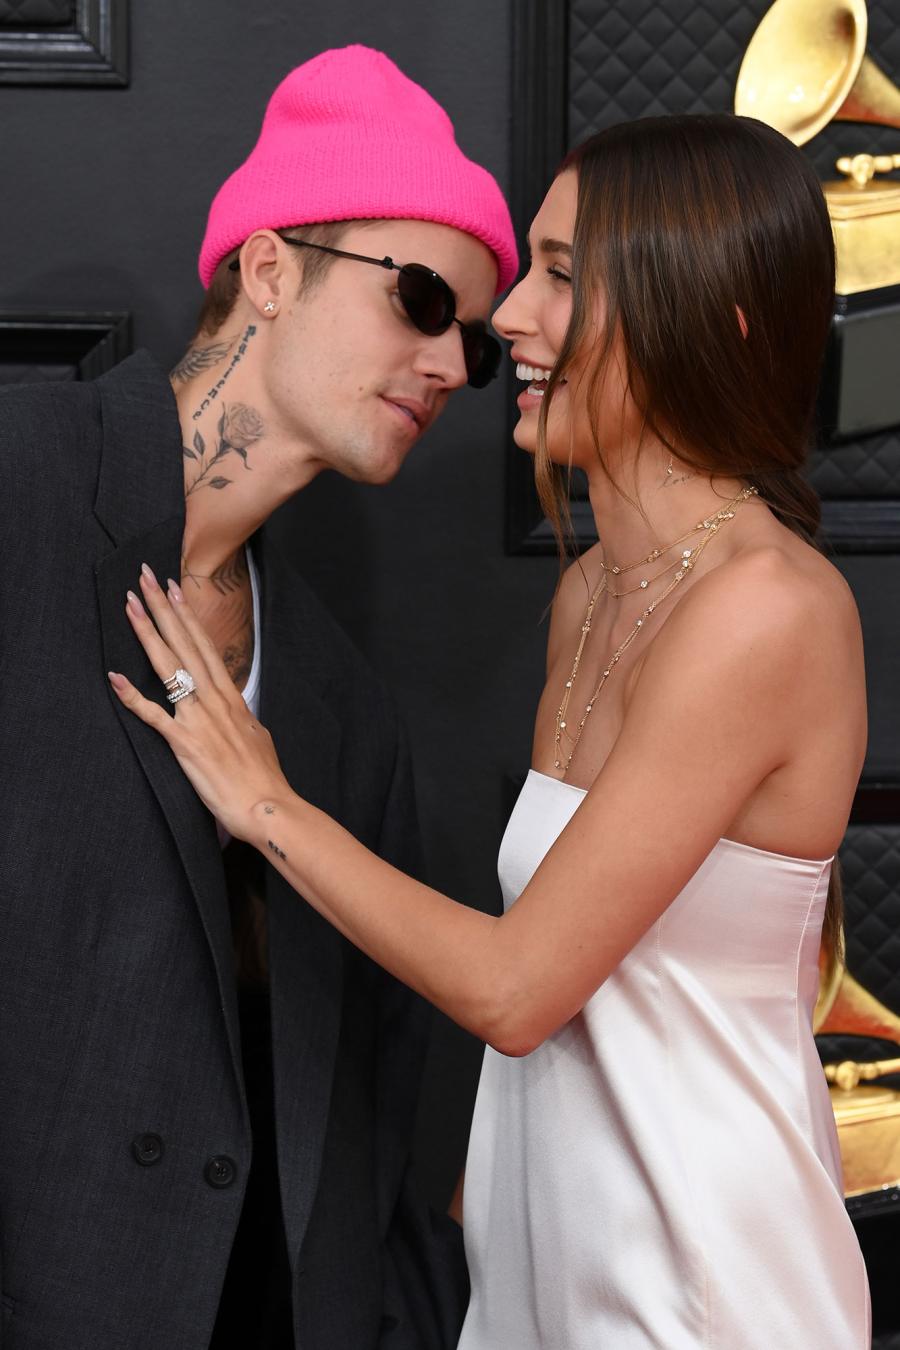 Justin Bieber and Wife Hailey Baldwin Attend 2022 Grammys Following Her Health Scare